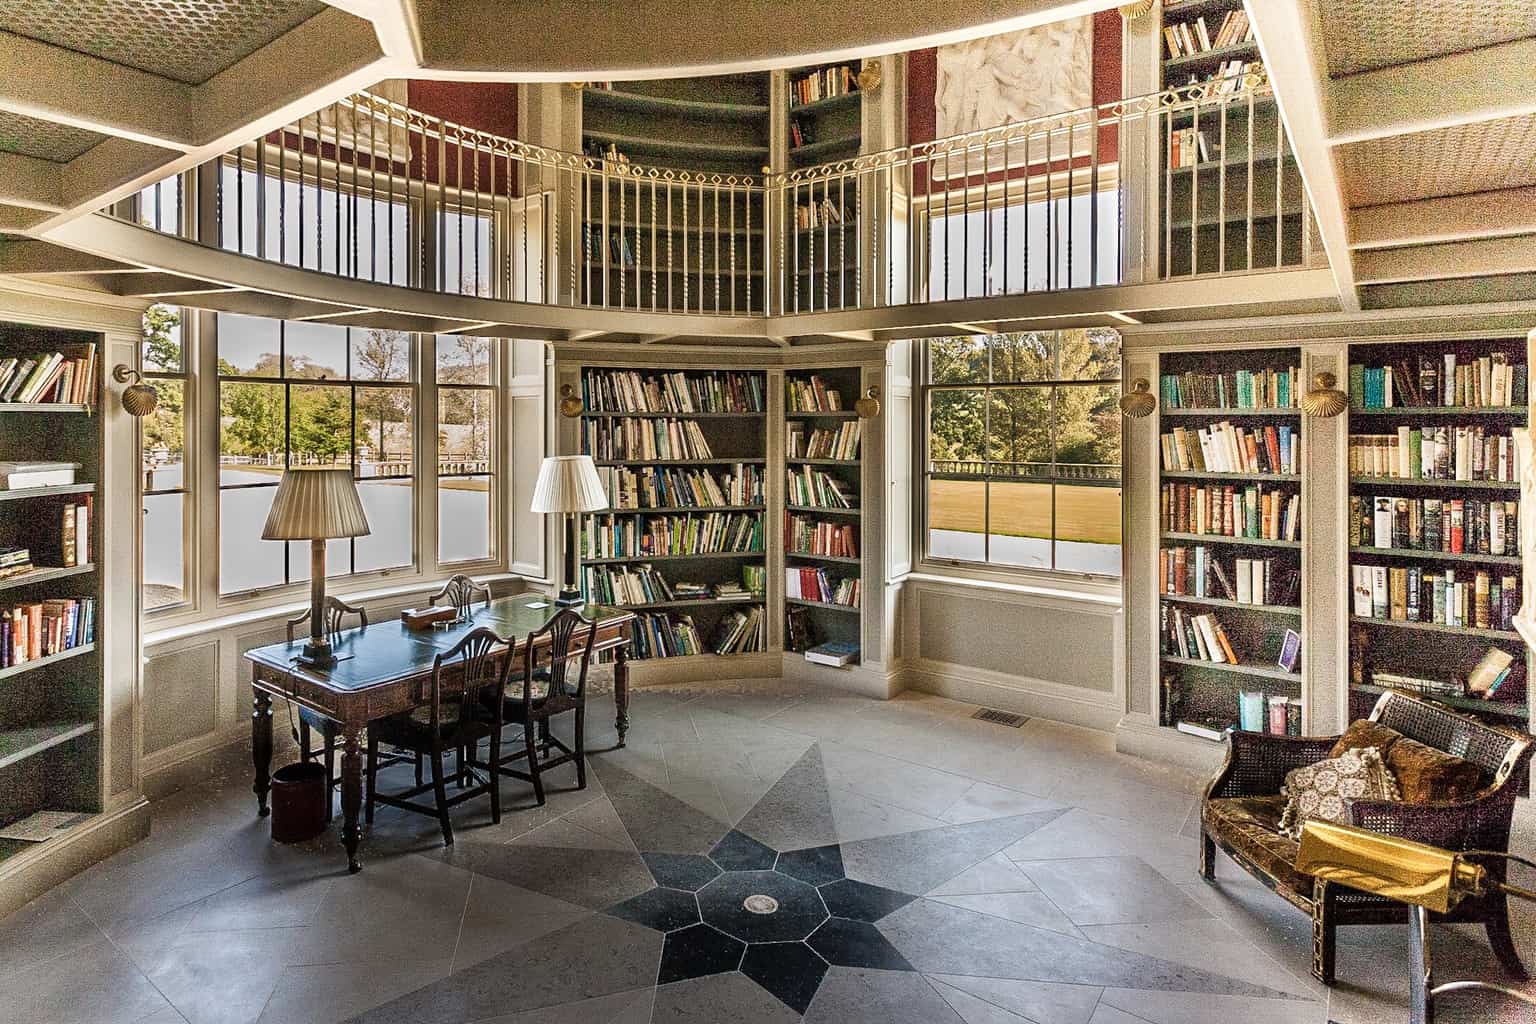  Picture of a library in Dorset - interior photography by Rick McEvoy 